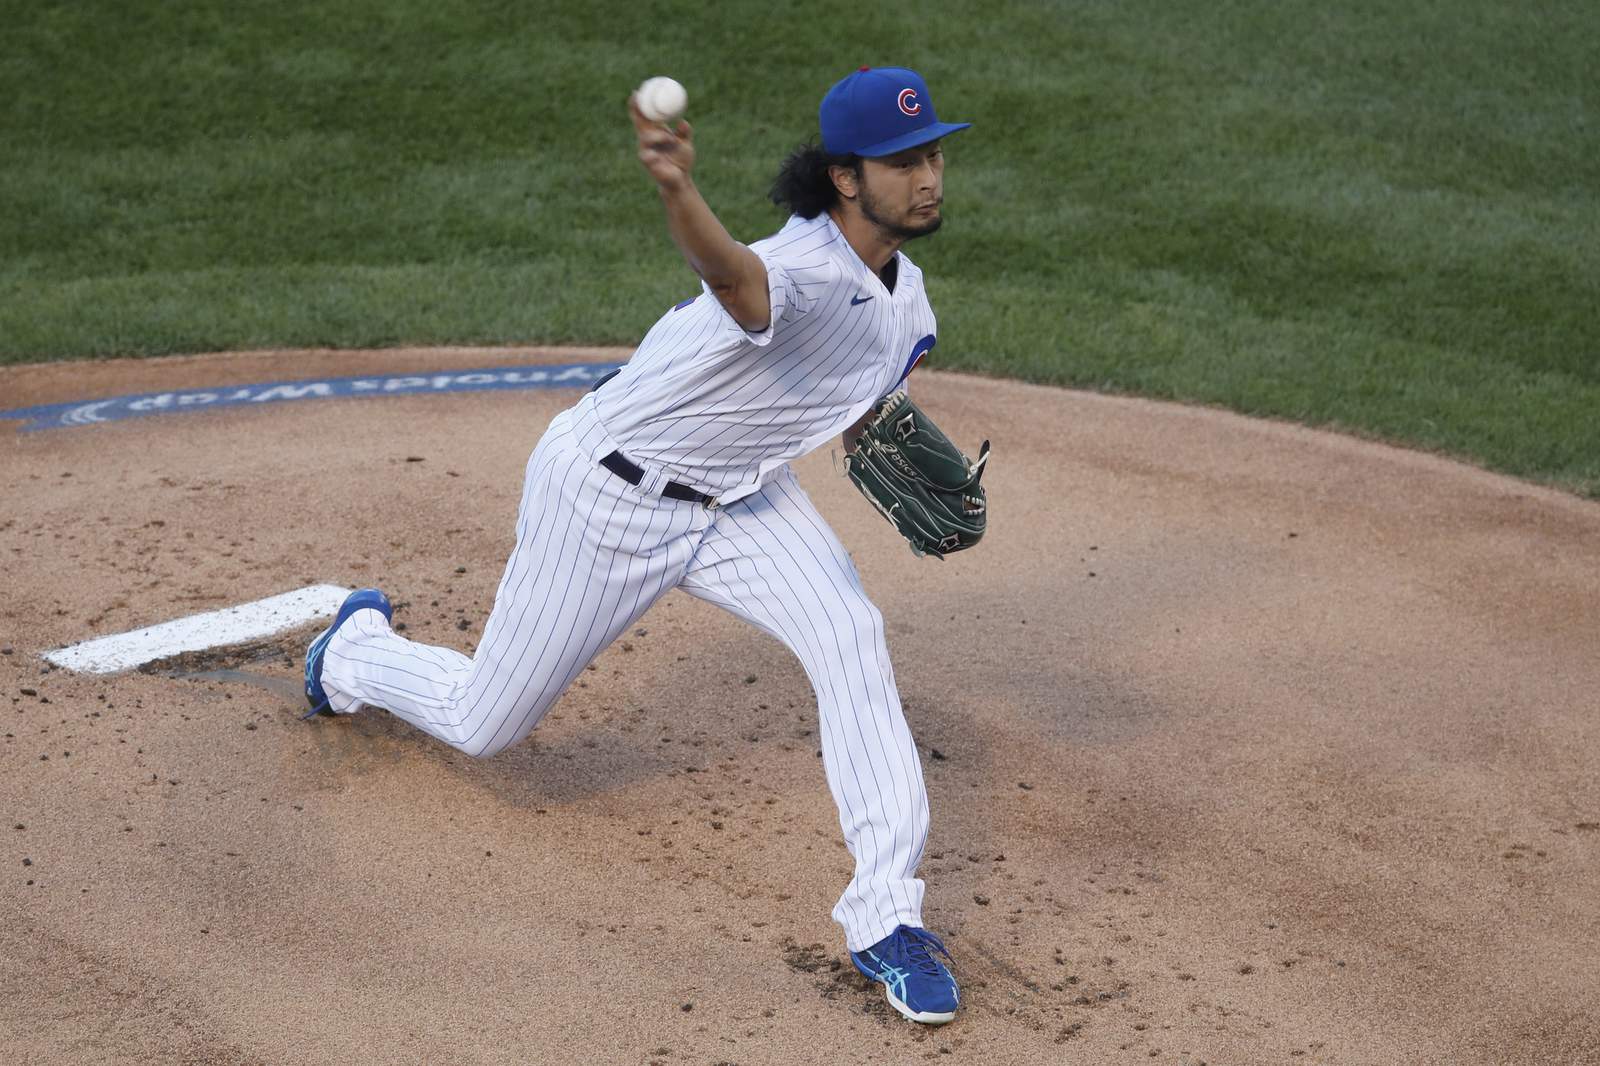 Darvish has no-hitter through 6 innings for Cubs vs Brewers